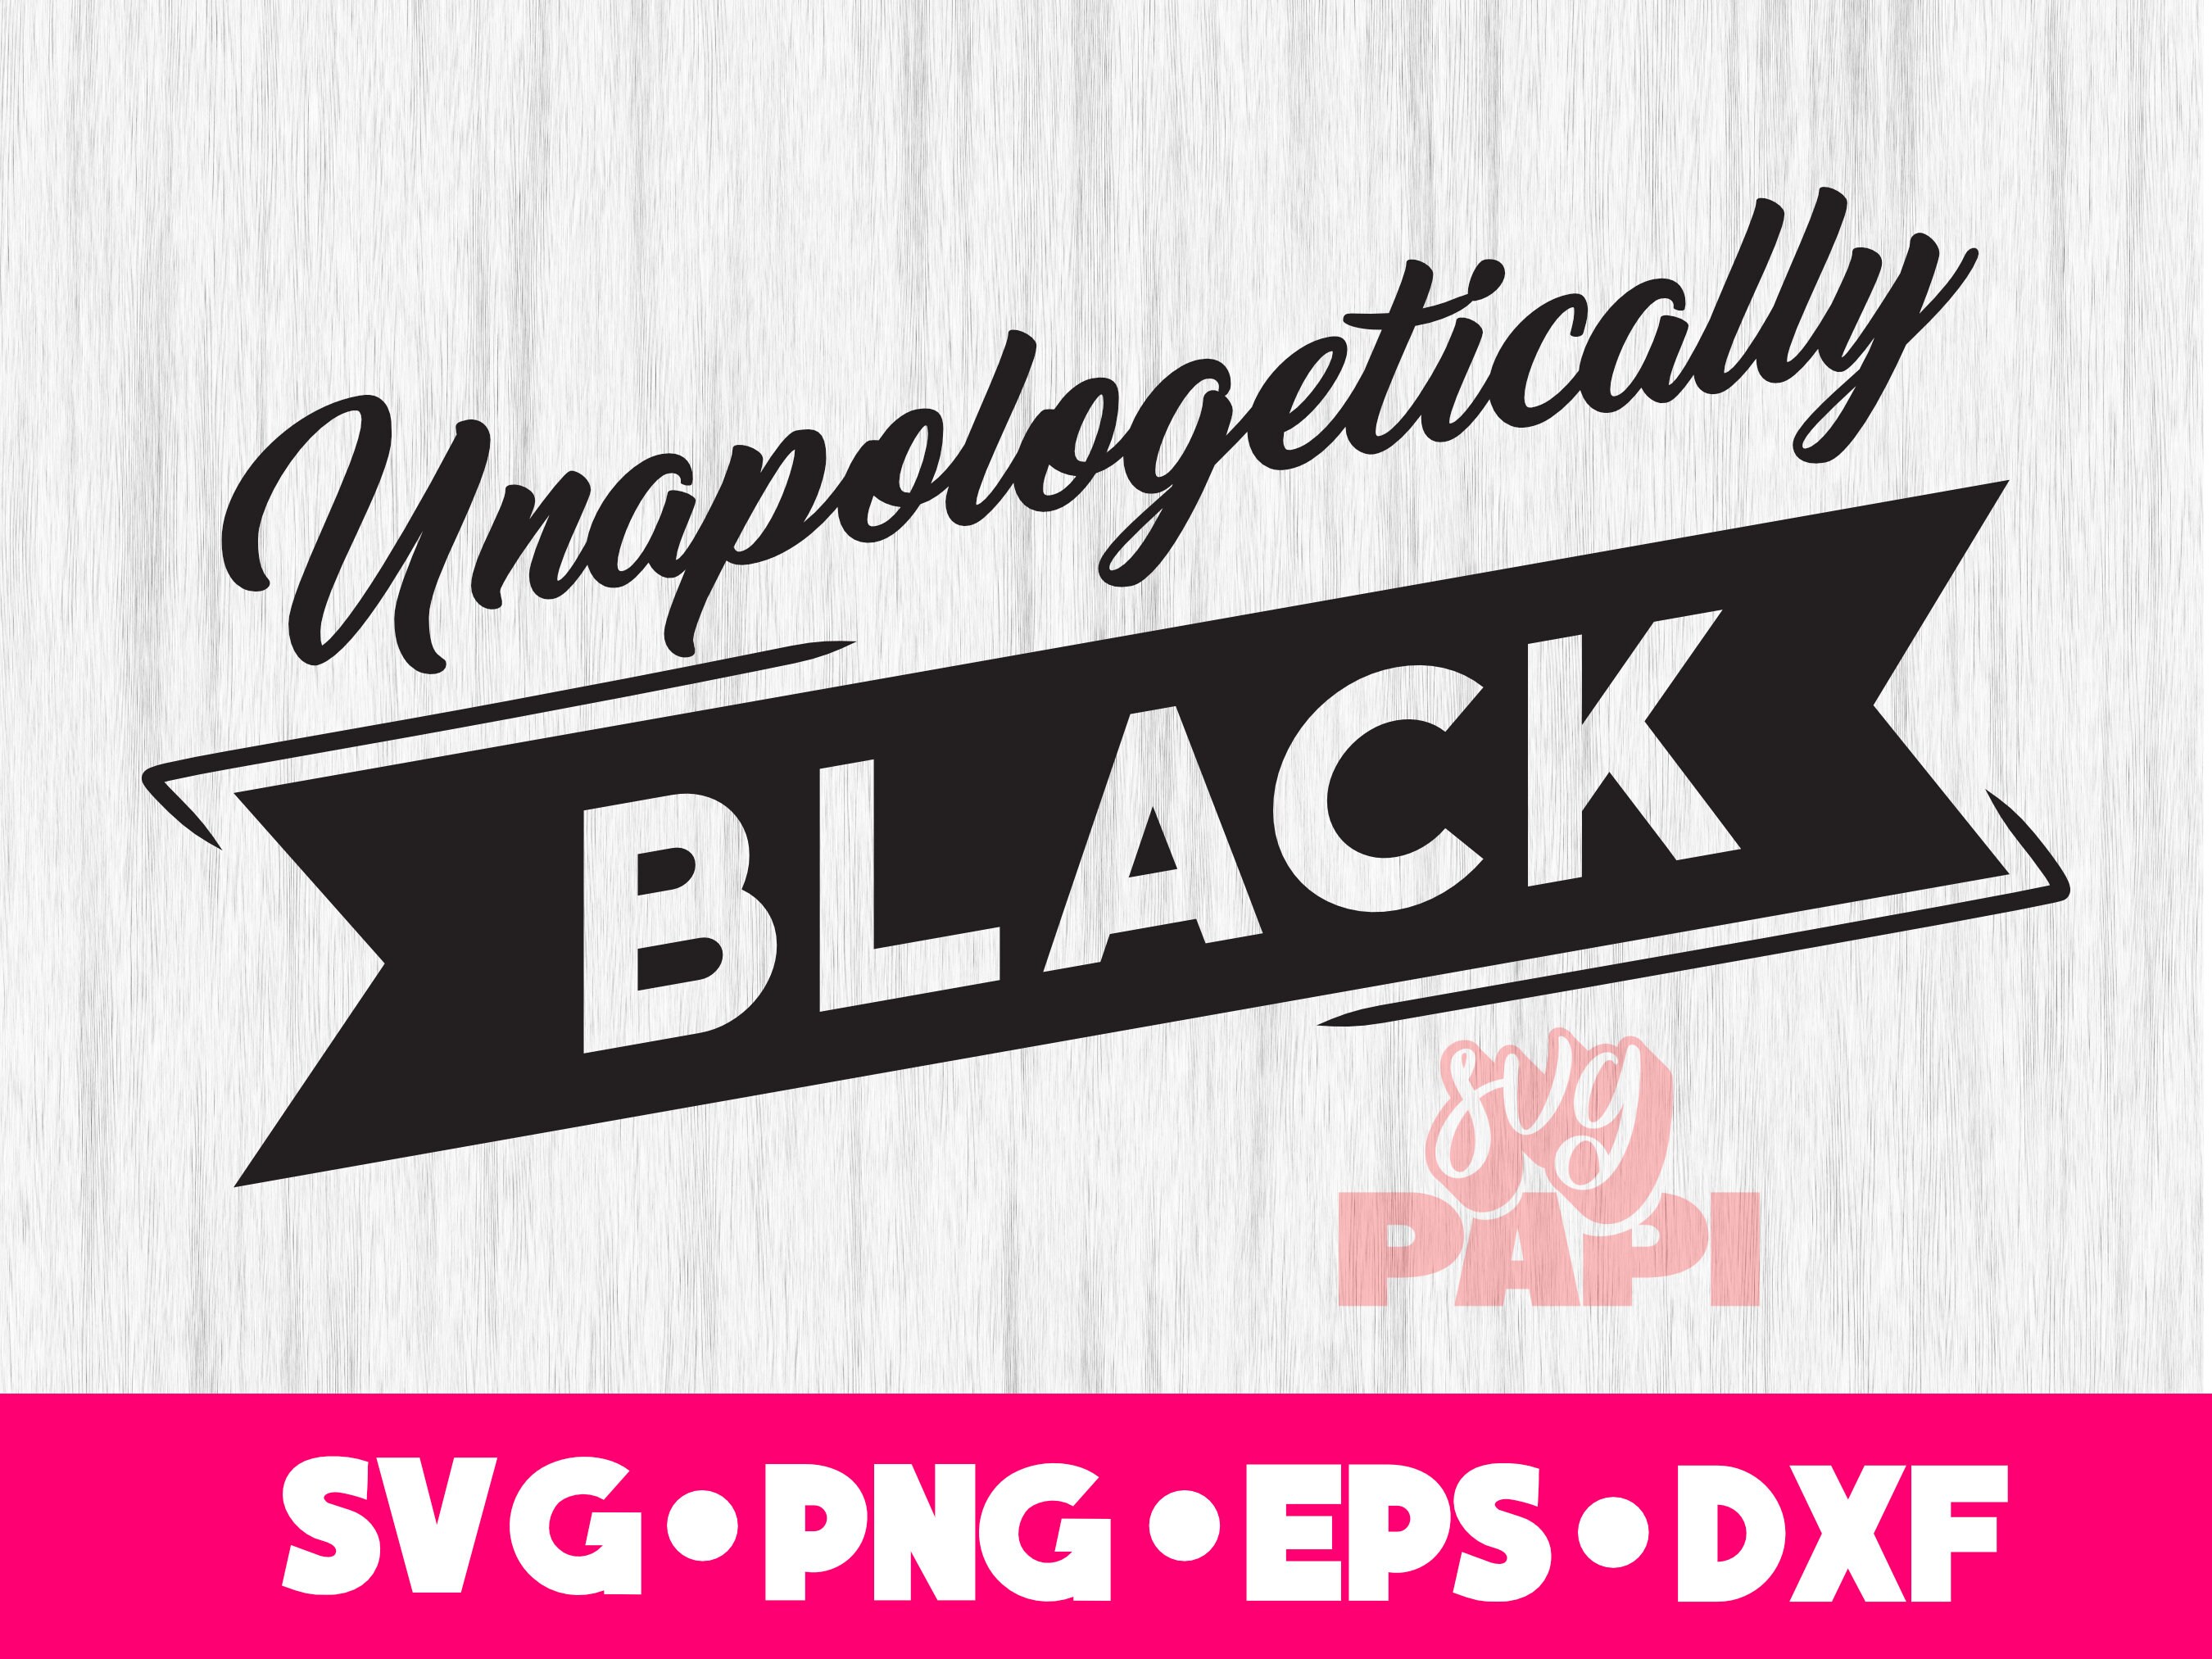 Unapologetically Black & Positive on X: This is the link to